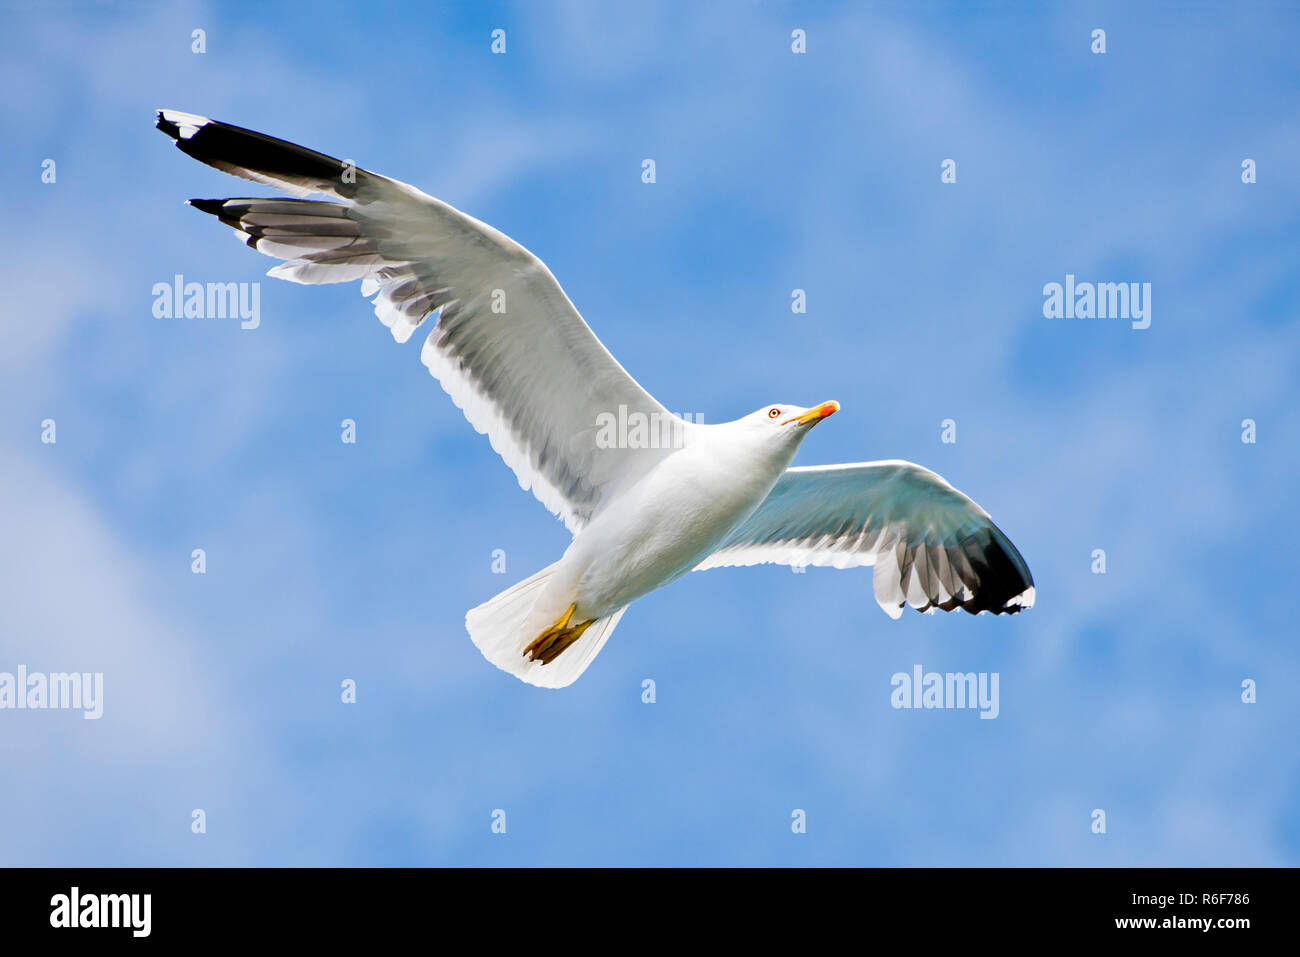 Horizontal close up of a seagull in flight. Stock Photo